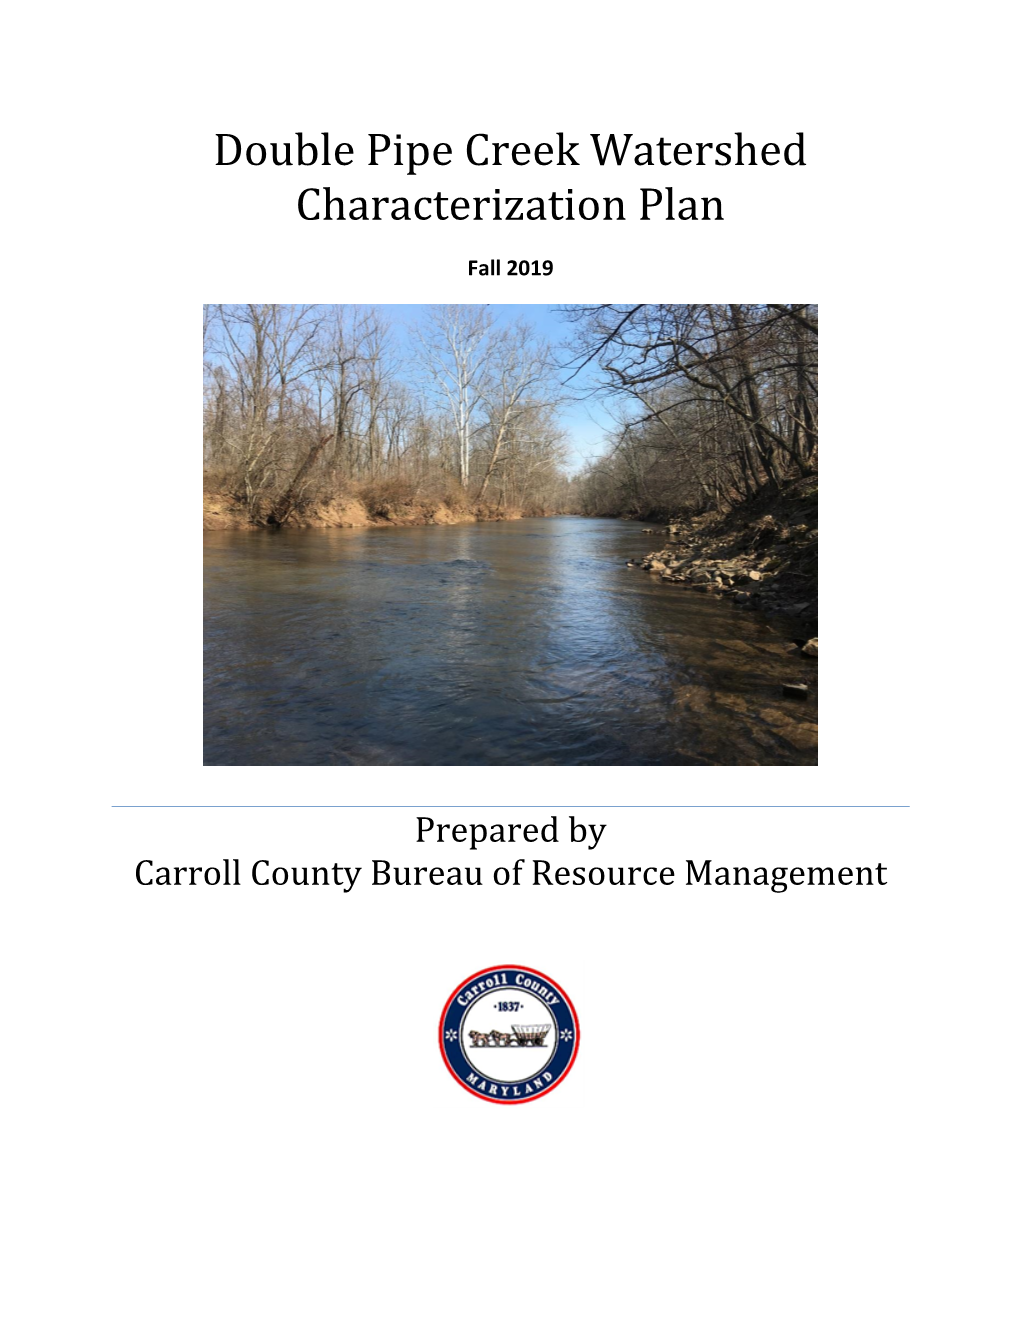 Double Pipe Creek Watershed Characterization Plan